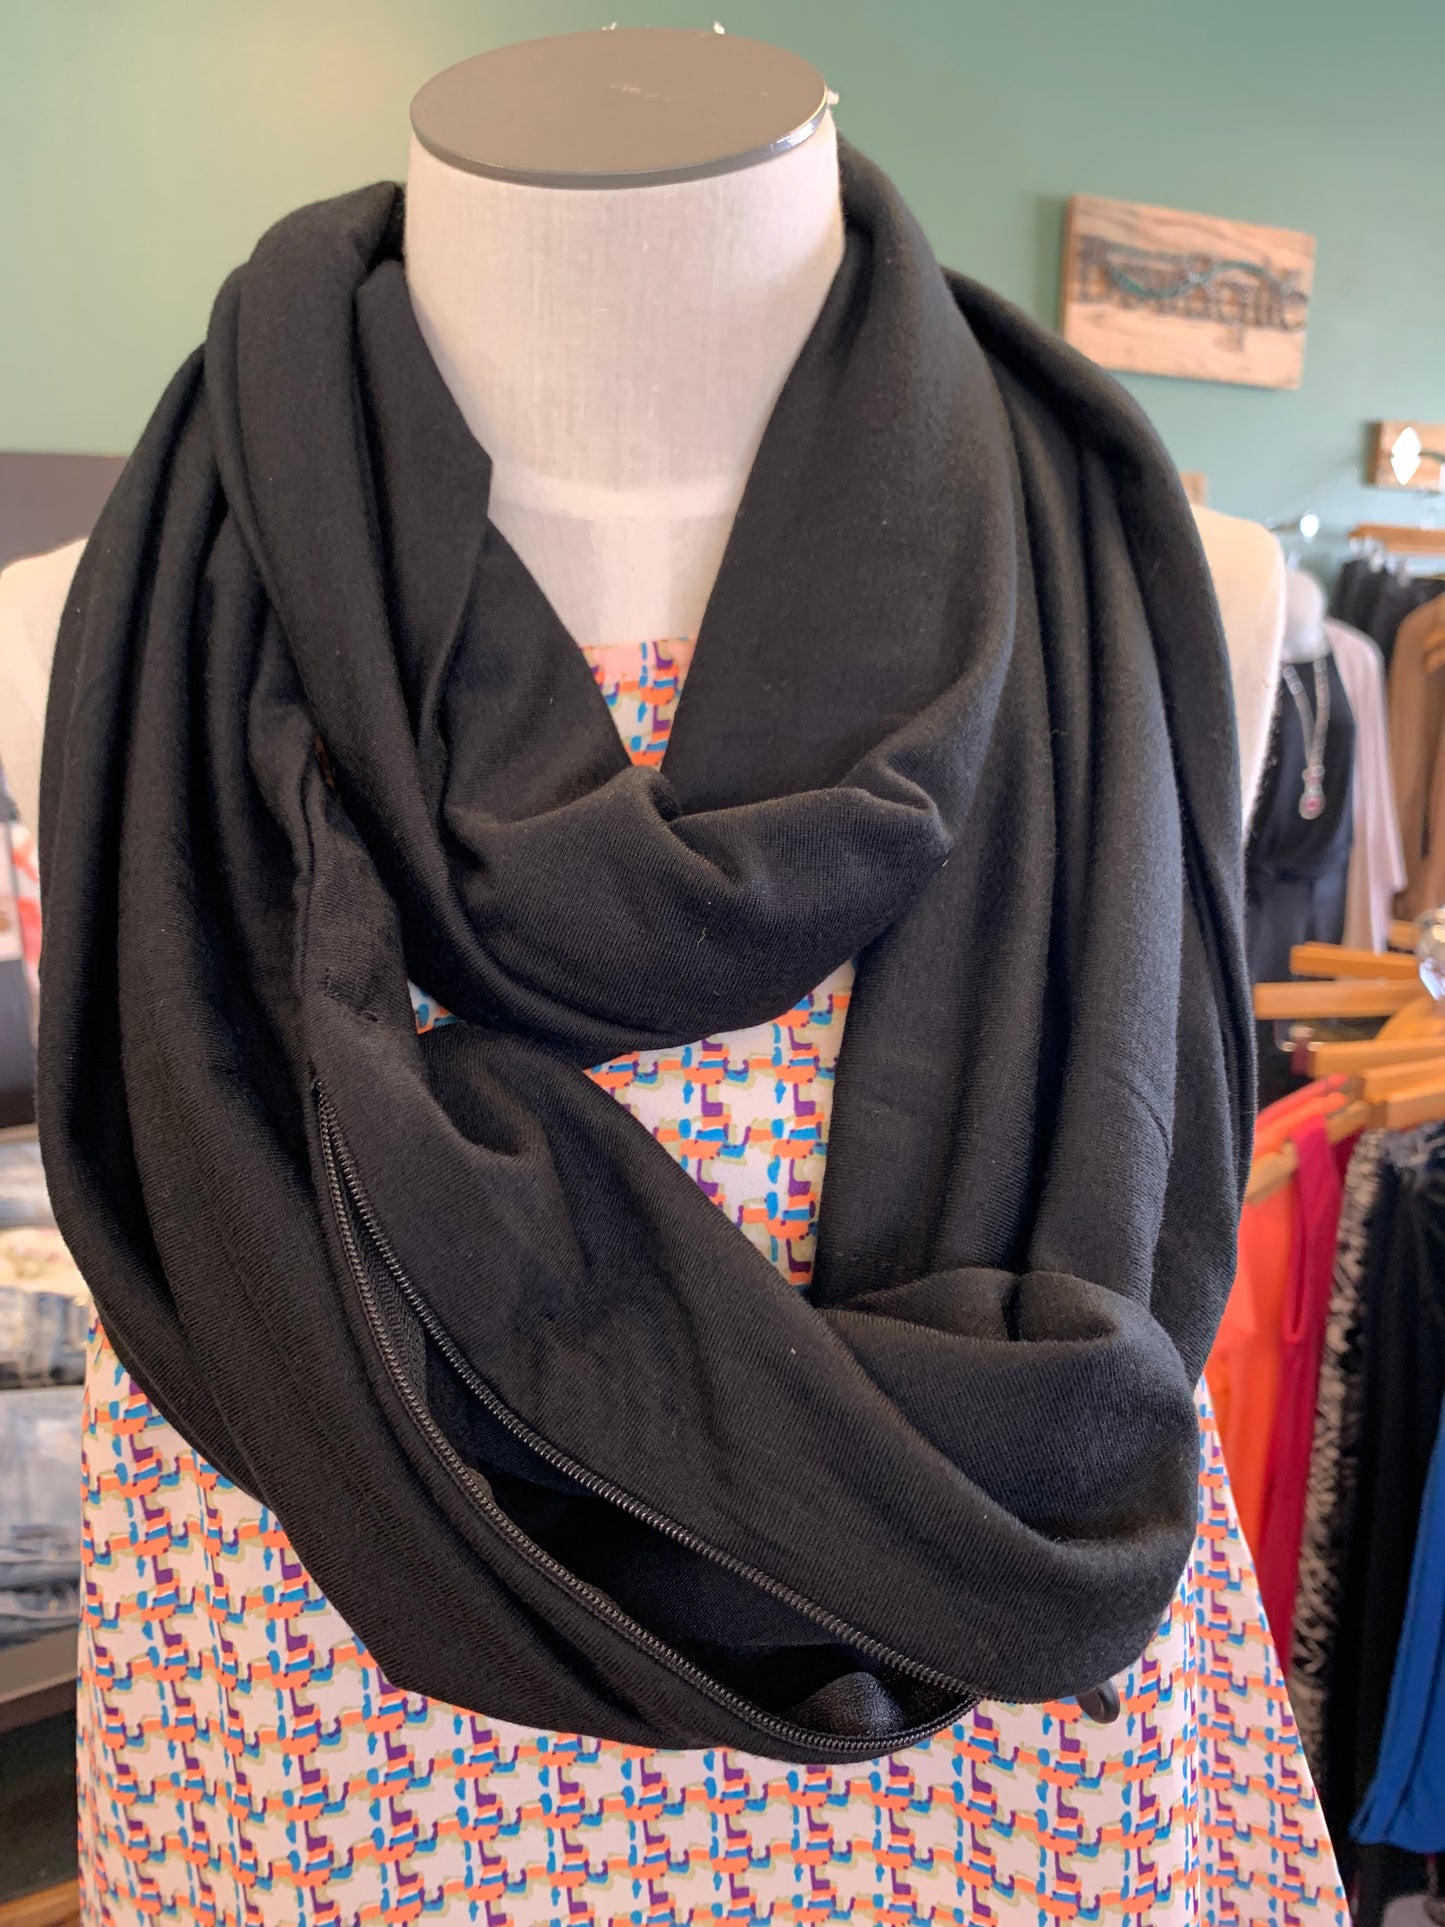 Infinity Scarf with Hidden Pocket